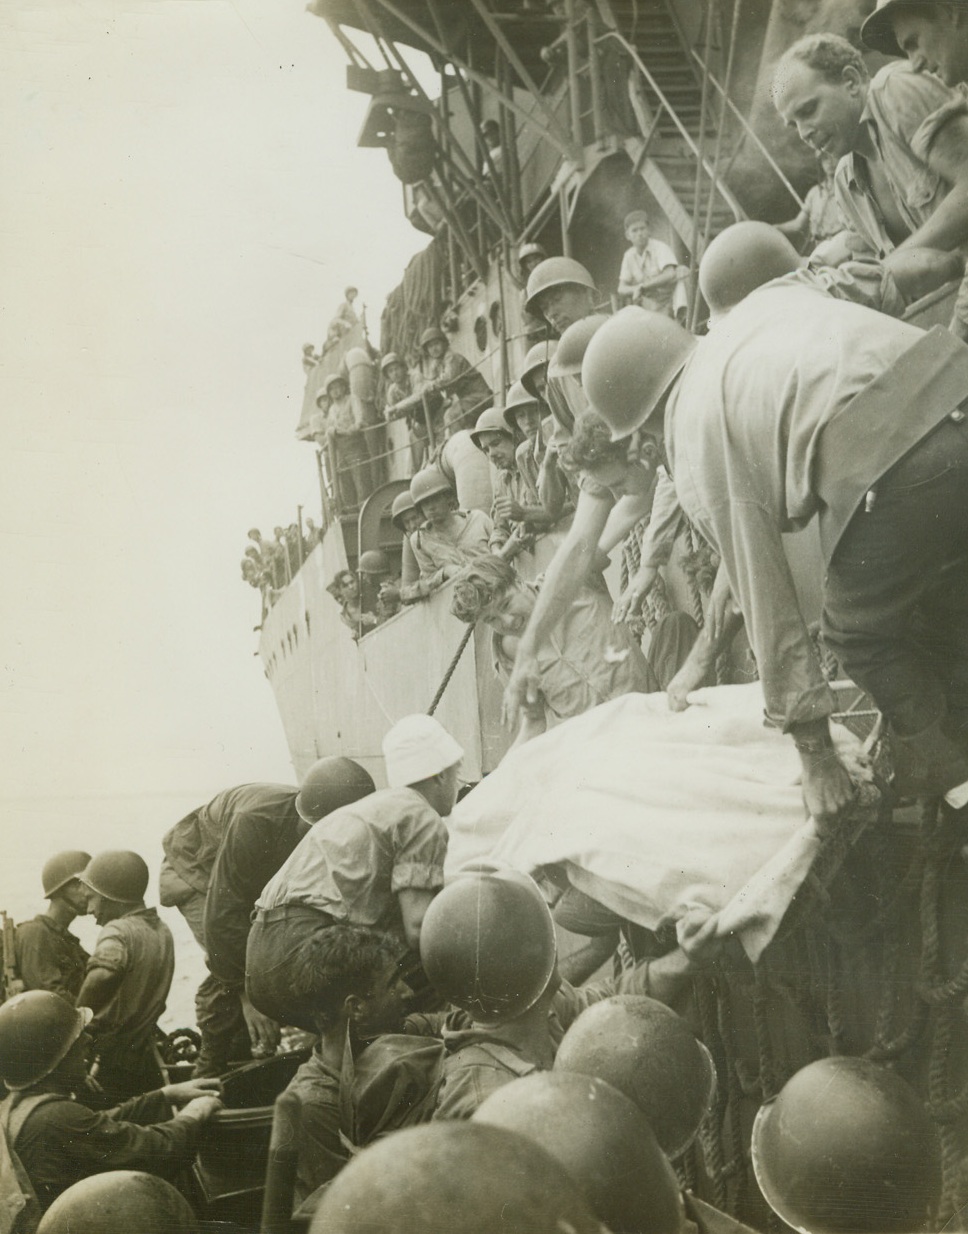 Los Negros Casualty Brought Aboard Destroyer, 3/14/1944. Los Negros Island, - Wounded in first moments of action after storming Los Negros island.  This soldier is lifted aboard destroyer for medical aid.  Photo by Frank Prist, Jr., ACME photographer for War Pool. Credit line ACME;